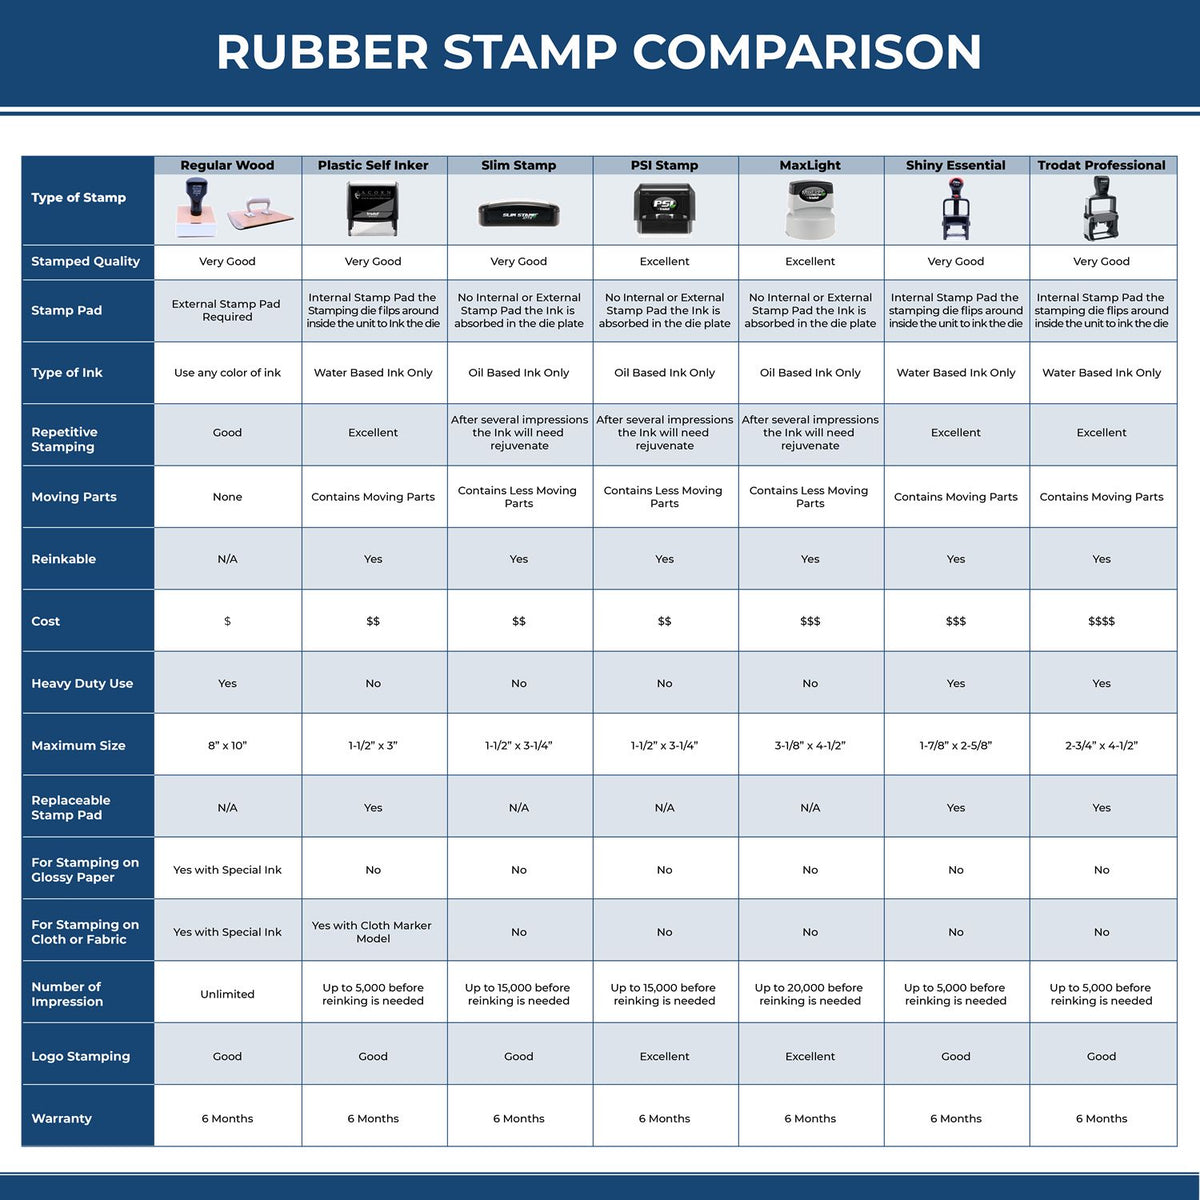 Red First Class Mail Xstamper Stamp 5072 Rubber Stamp Comparison